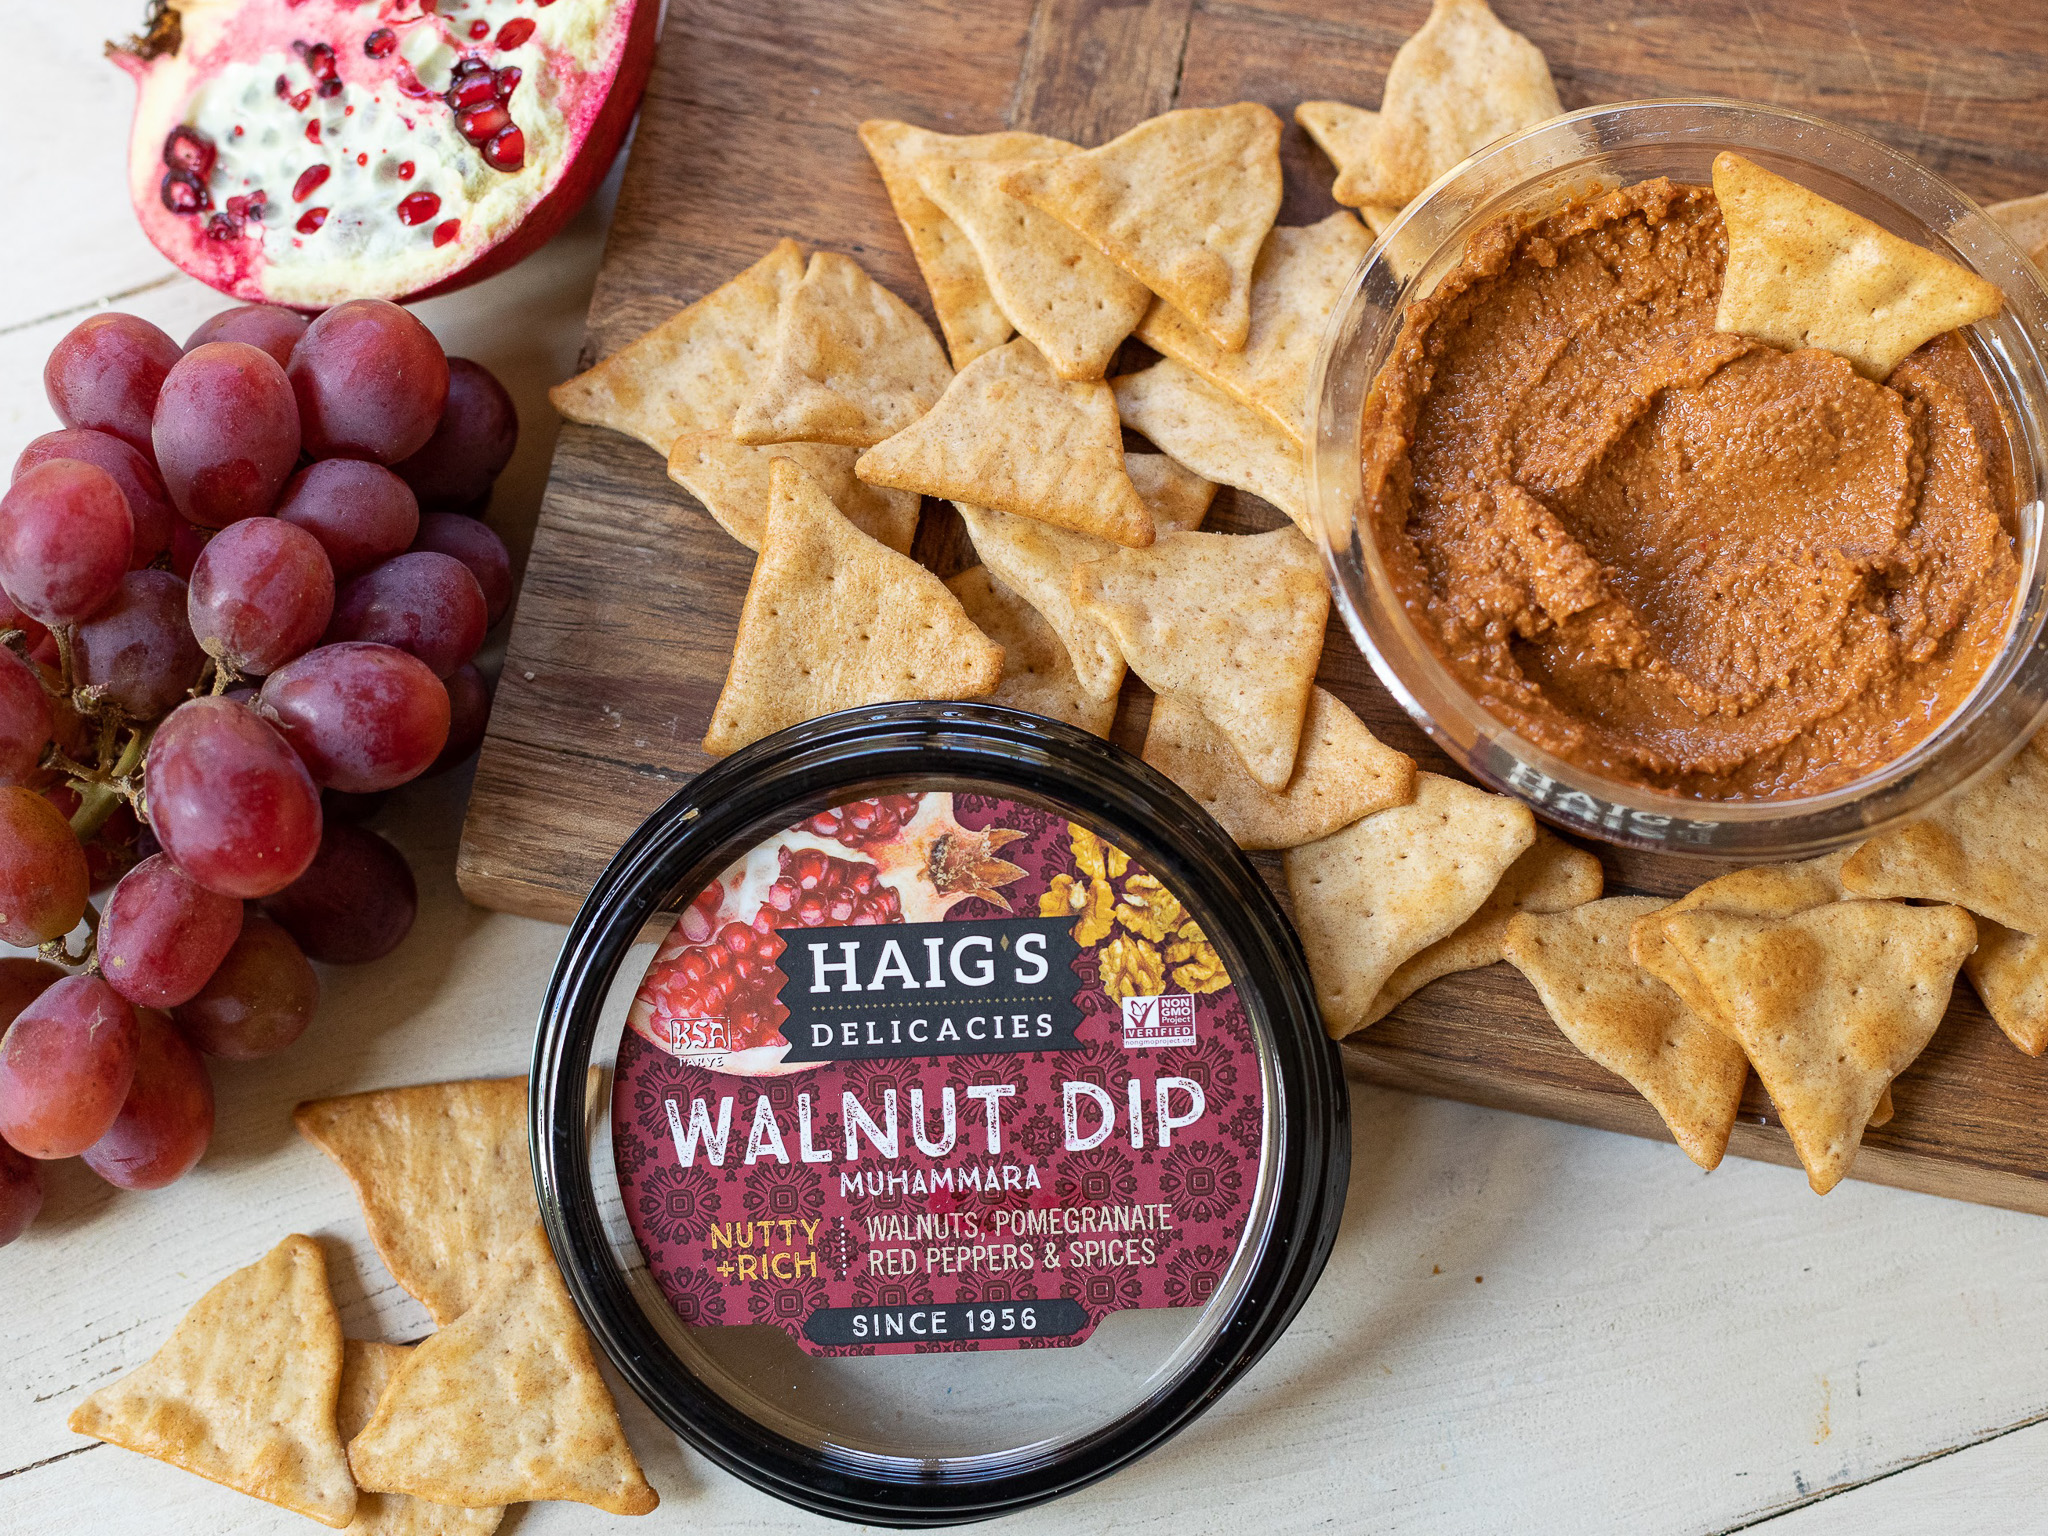 Haig’s Delicacies Walnut Dip Or Baba Ghannaouge As Low As $2 At Publix